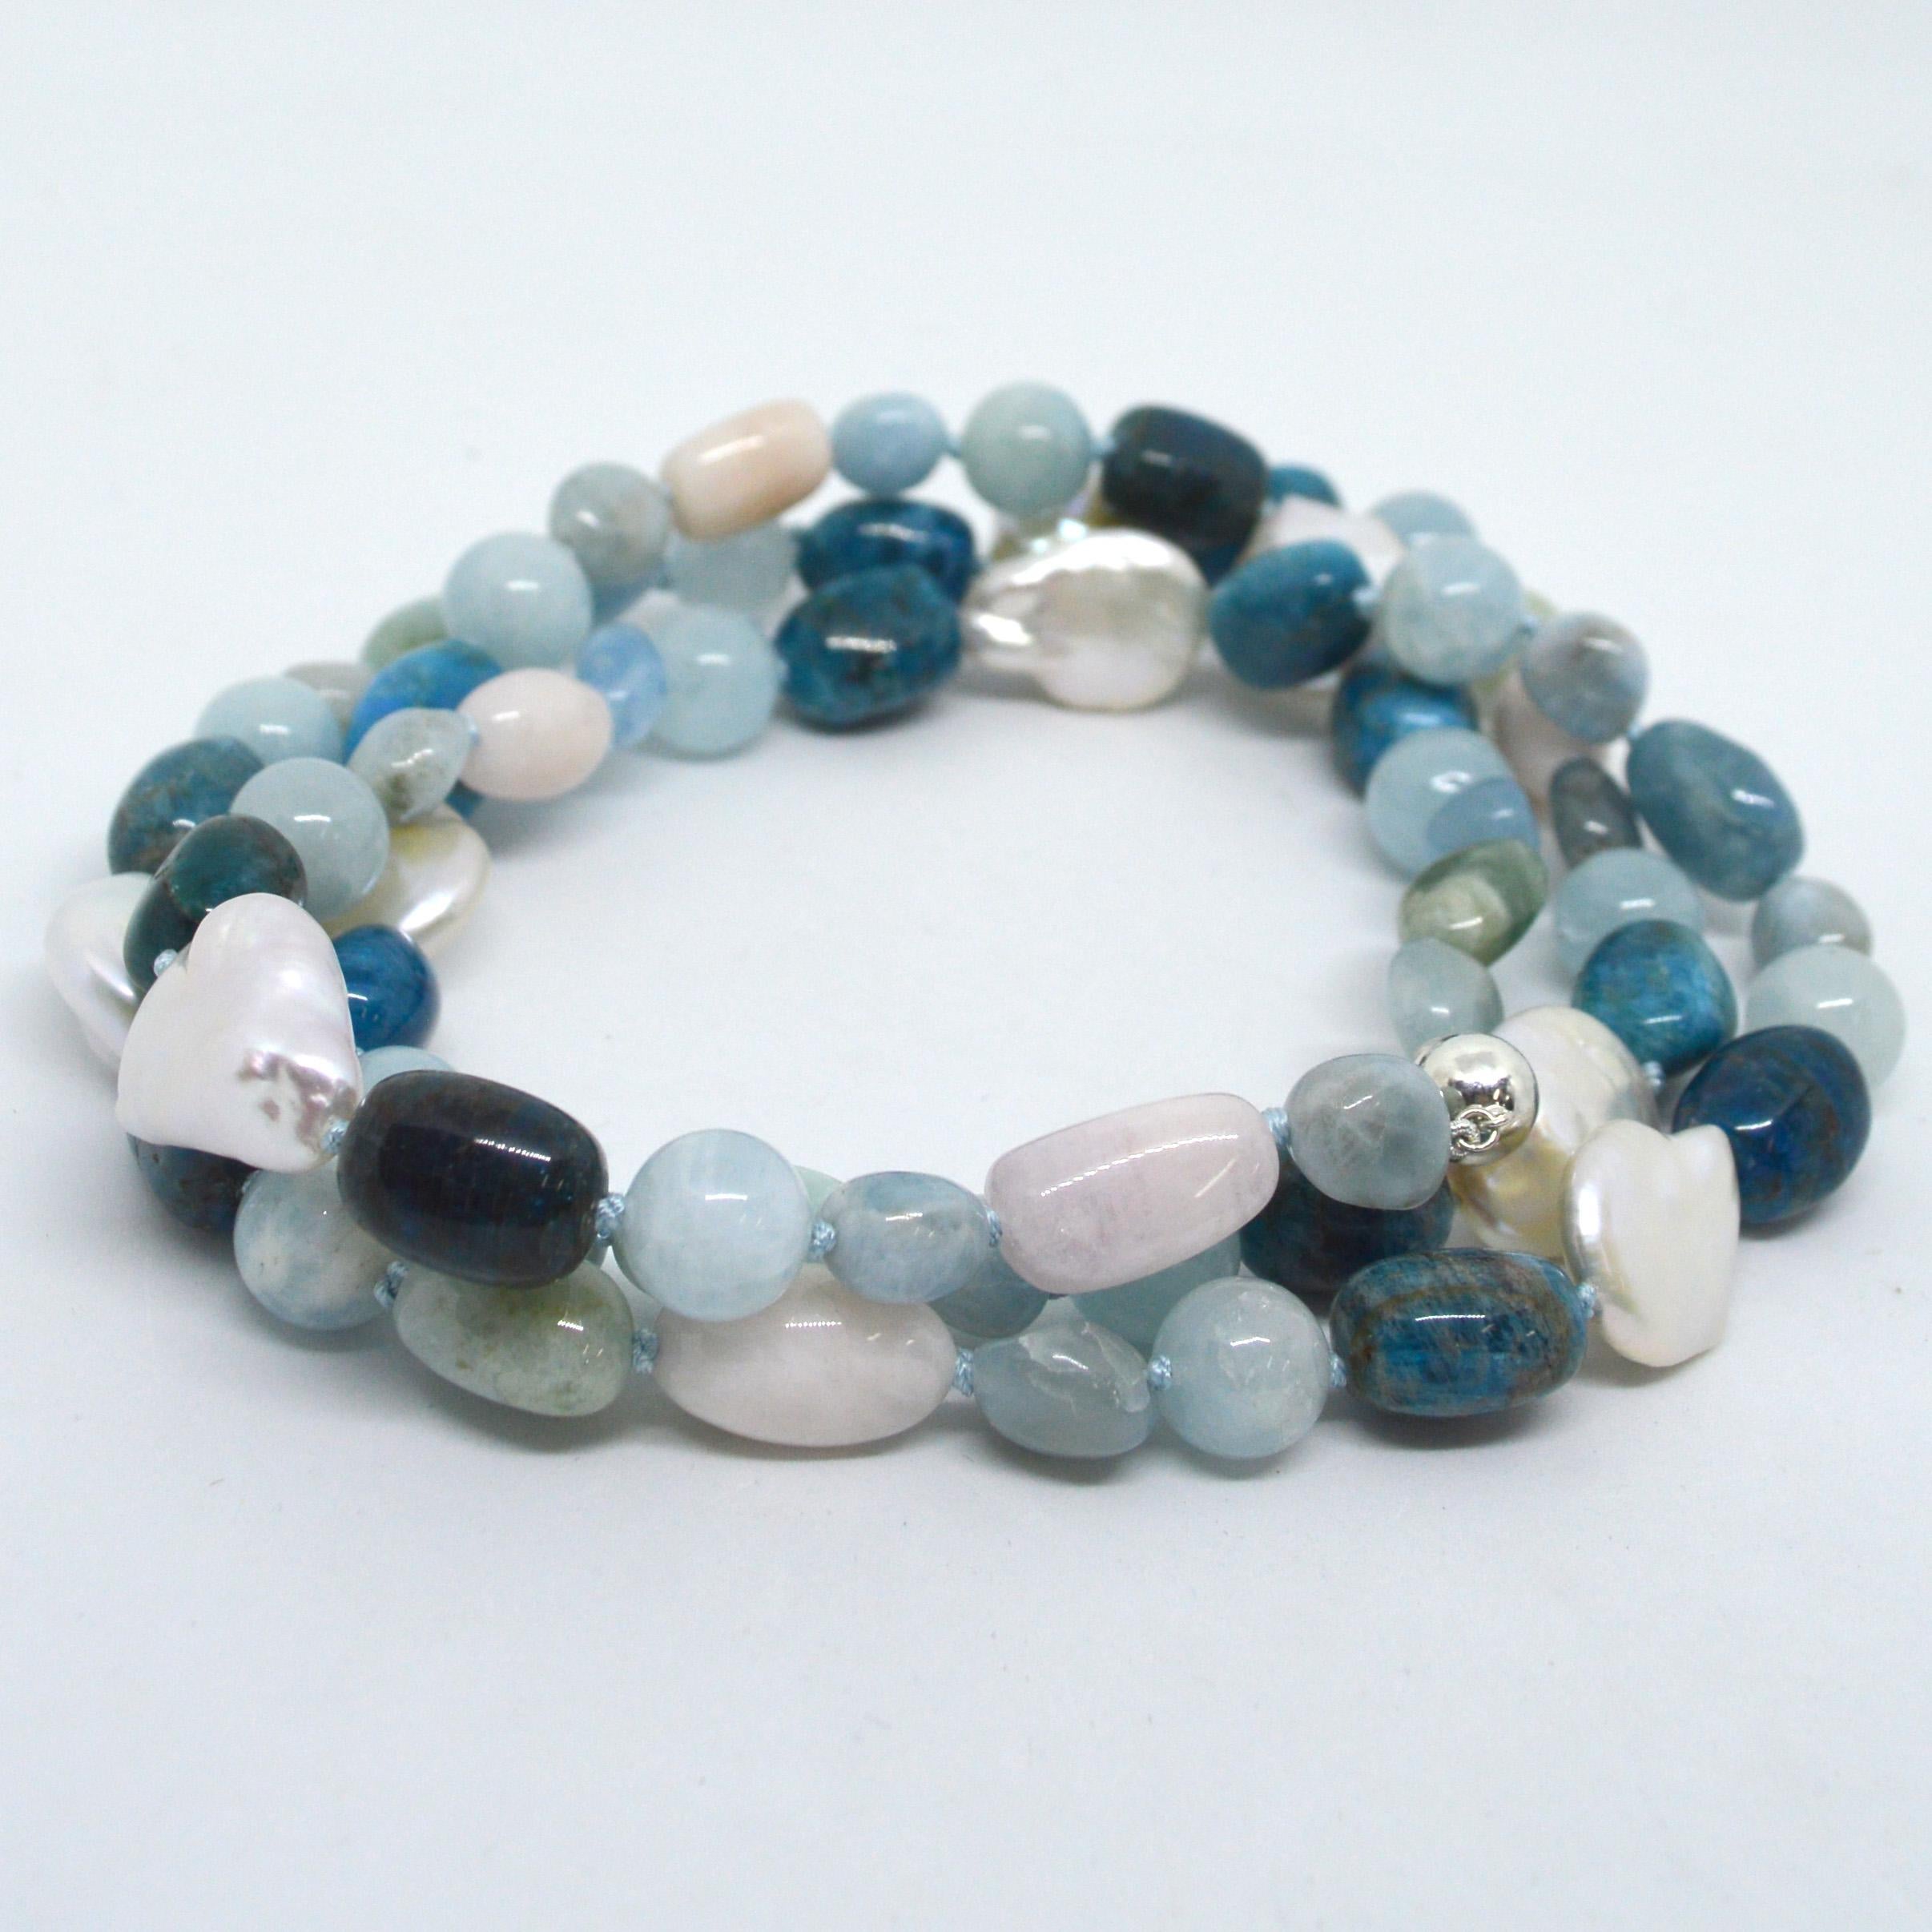 Beautiful Shades of Blue with a hint of pink make this lovely long necklace. 12mm Polished Aquamarine, approx 14mm Beryl  (multi-Colour Aquamarine and Morganite) nuggets, 16x12mm Bright blue apatite and 21mm plus Baroque Fresh Water Coin Pearls with